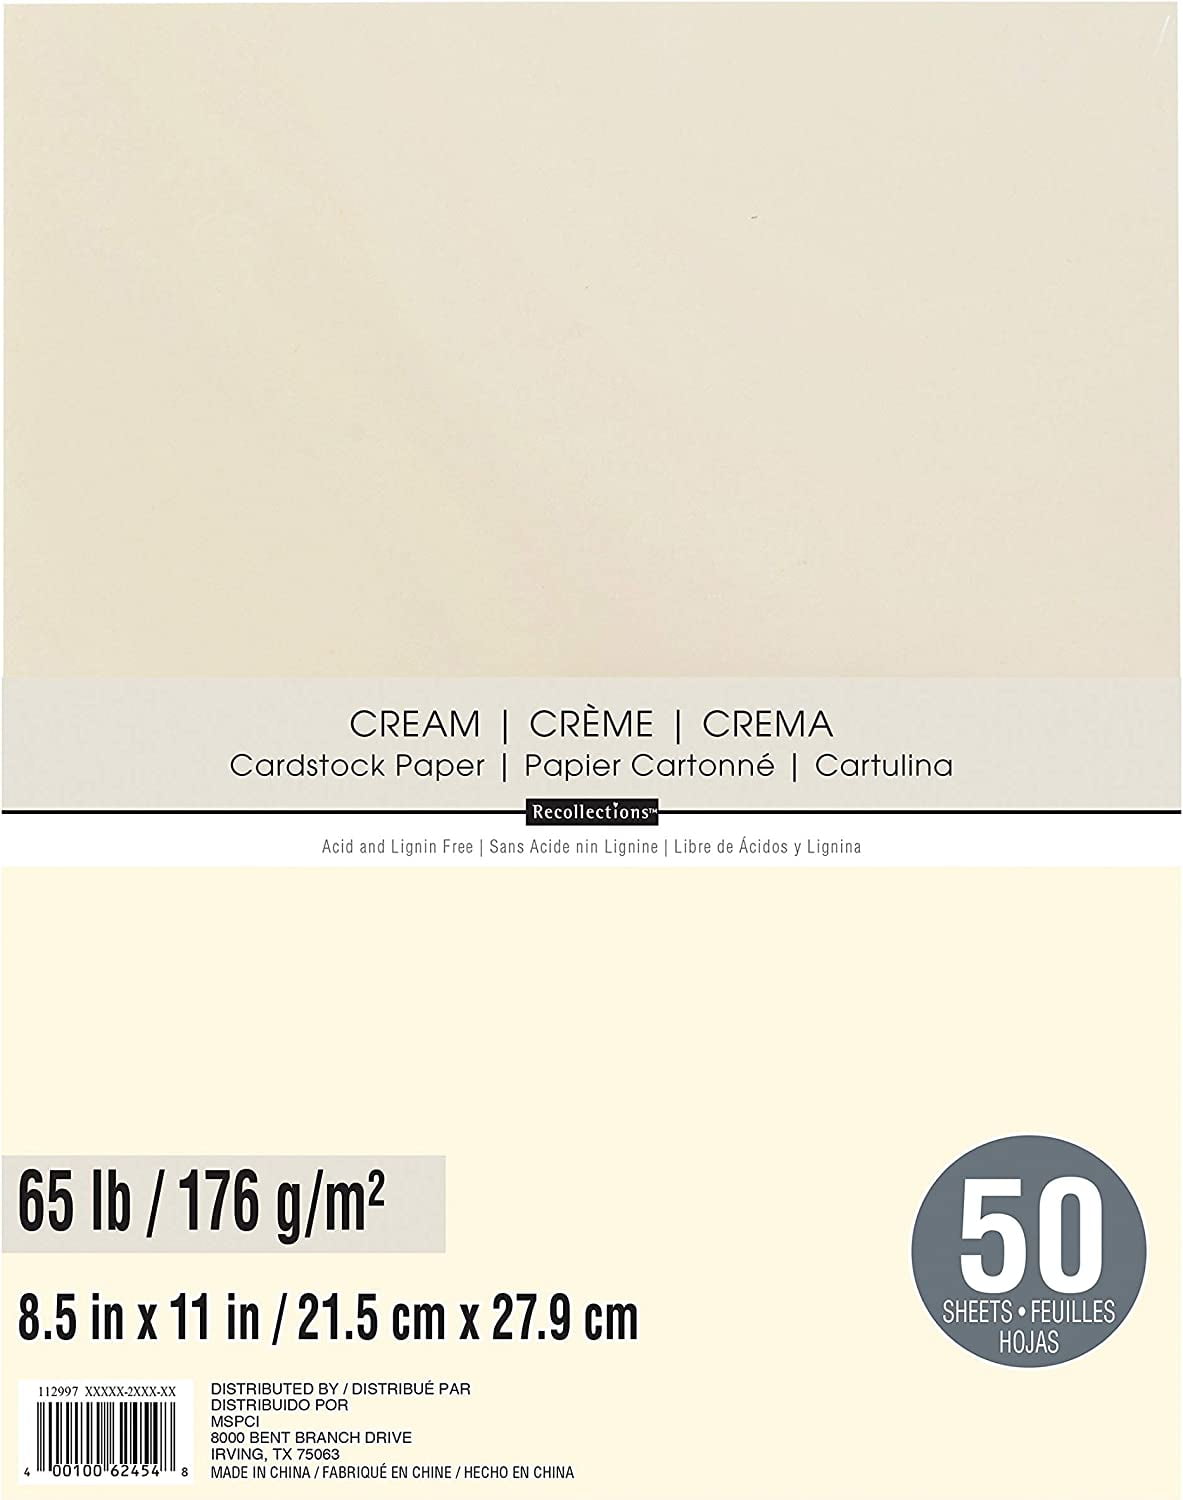  Recollections Cream Cardstock - 65lb  Cardstock-Papercardstock-Craft Cardstock - Cardstock Pack of 50 : Arts,  Crafts & Sewing